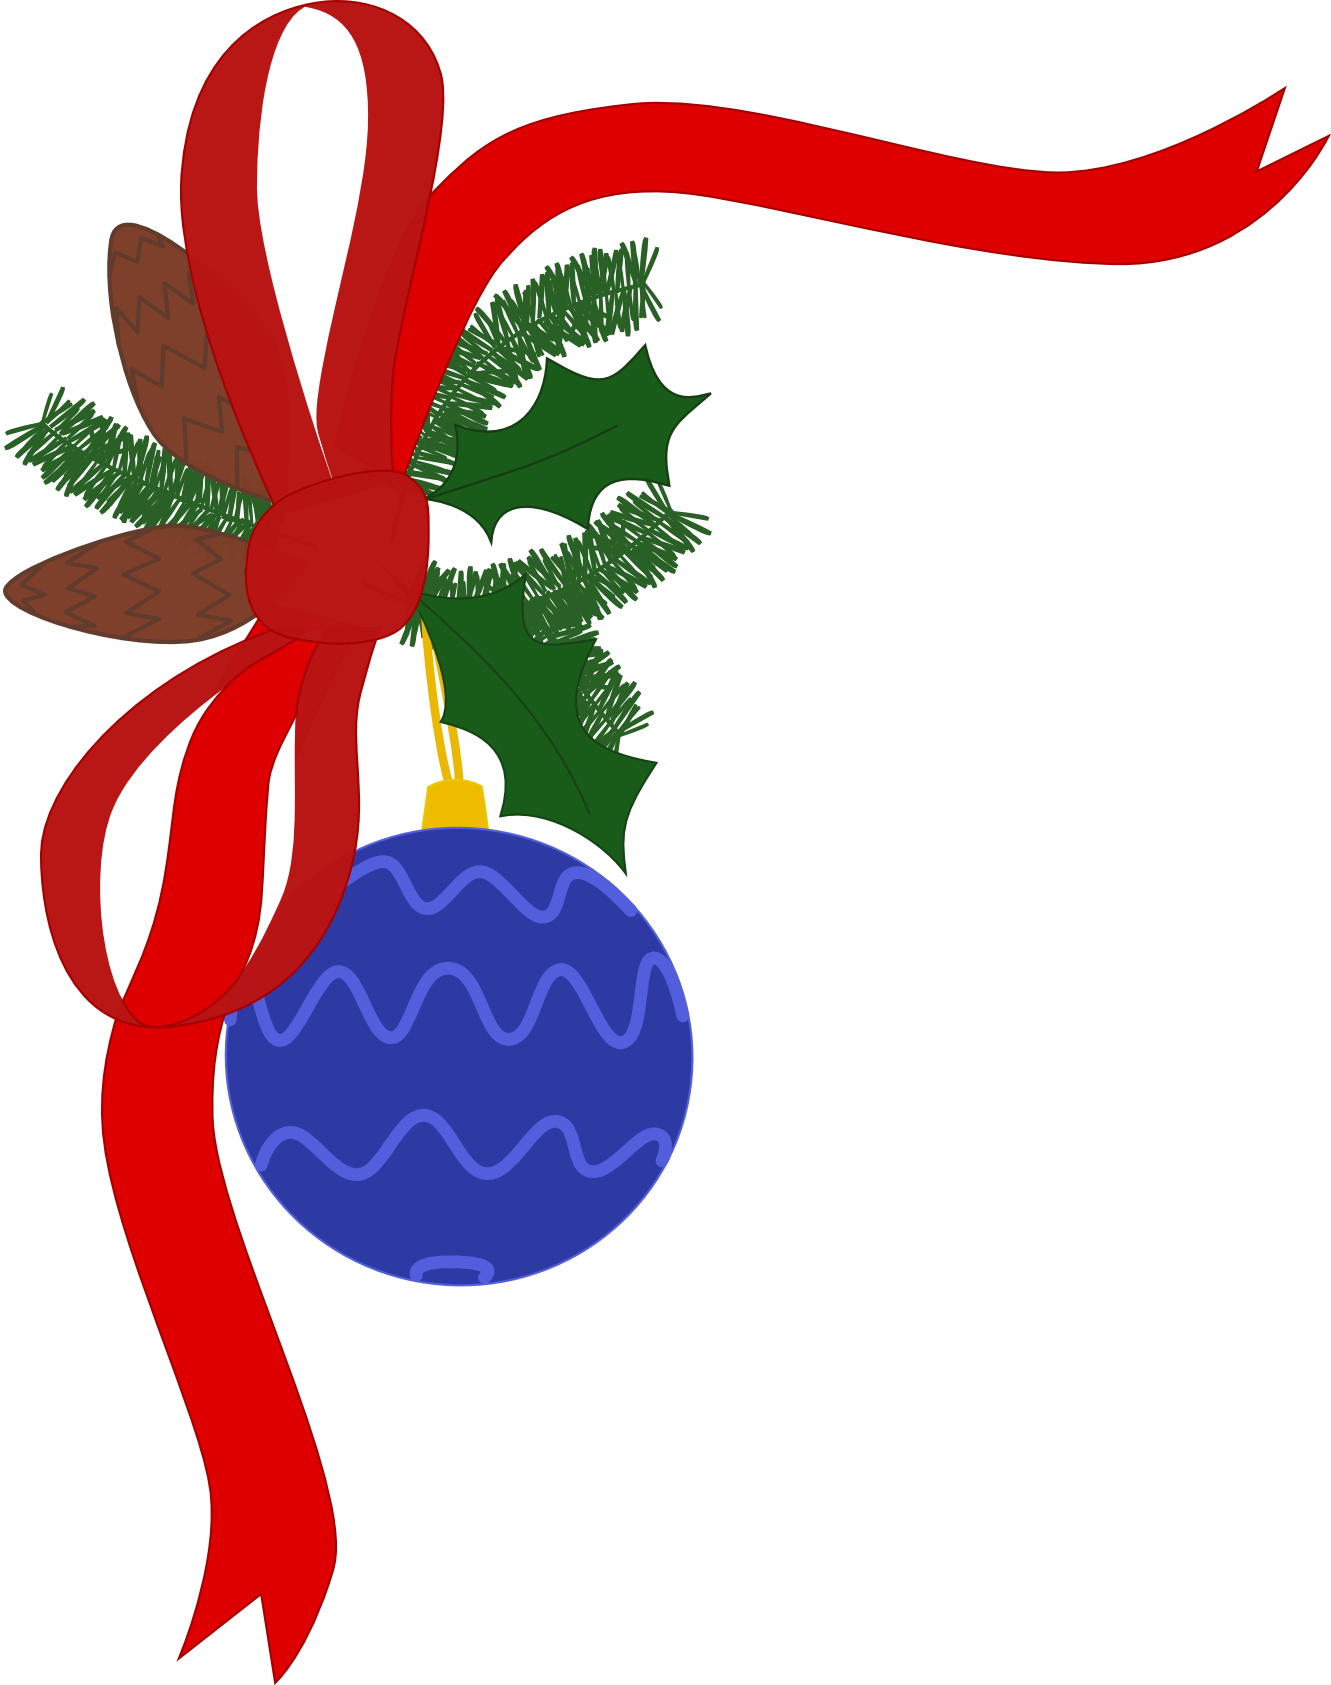 Christmas Decorations Clip Art Free - Clipart library